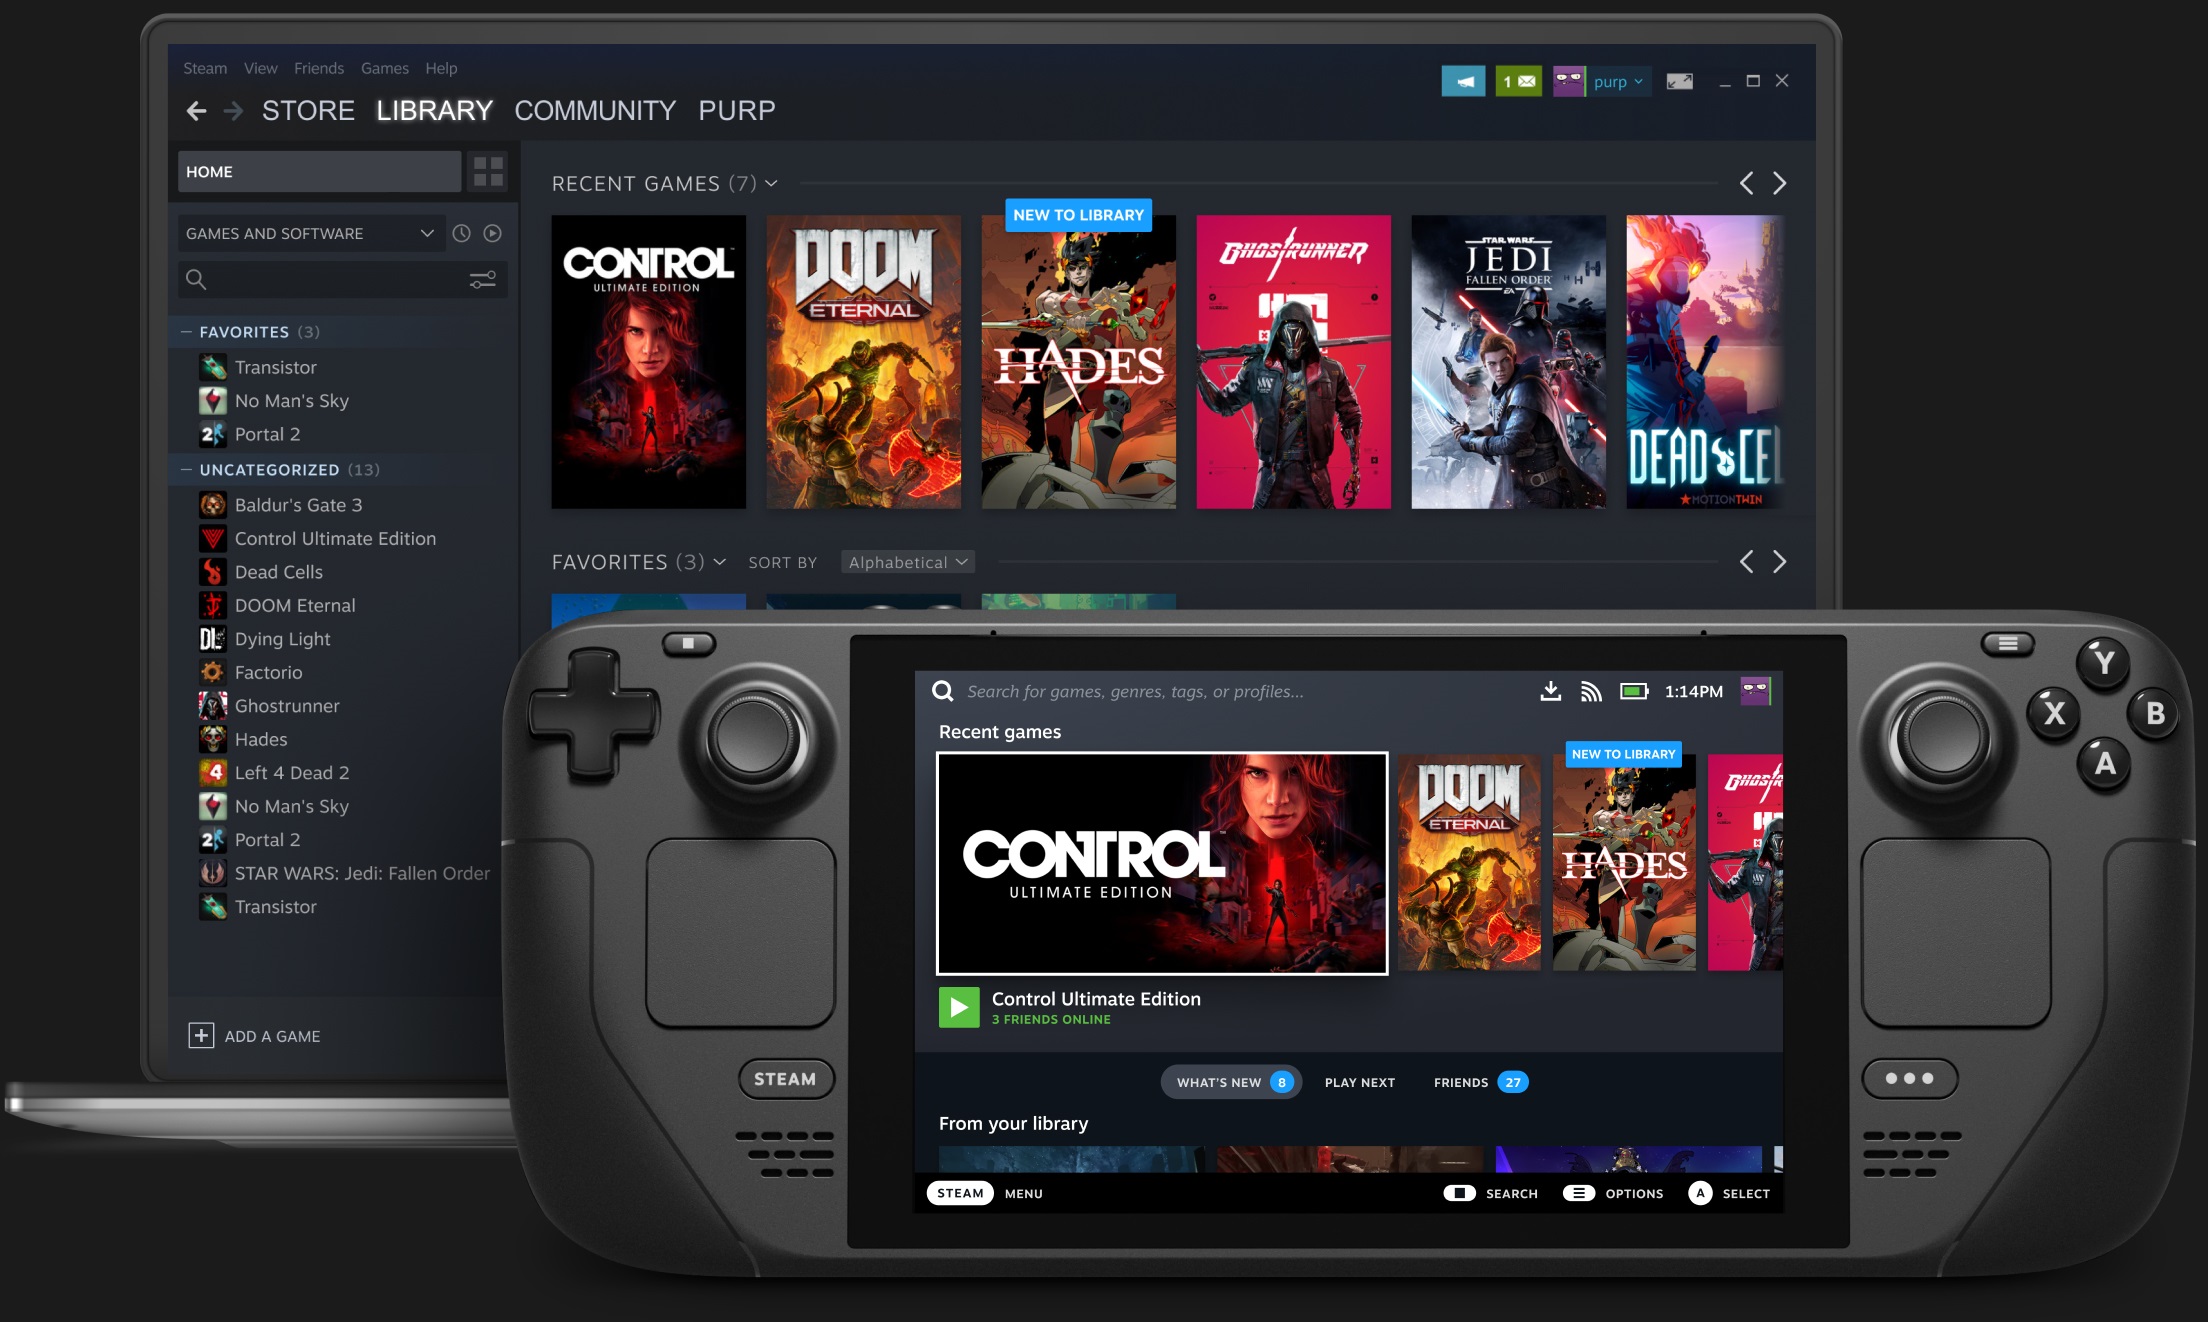 Steam Deck is a handheld PC gaming device launching this December